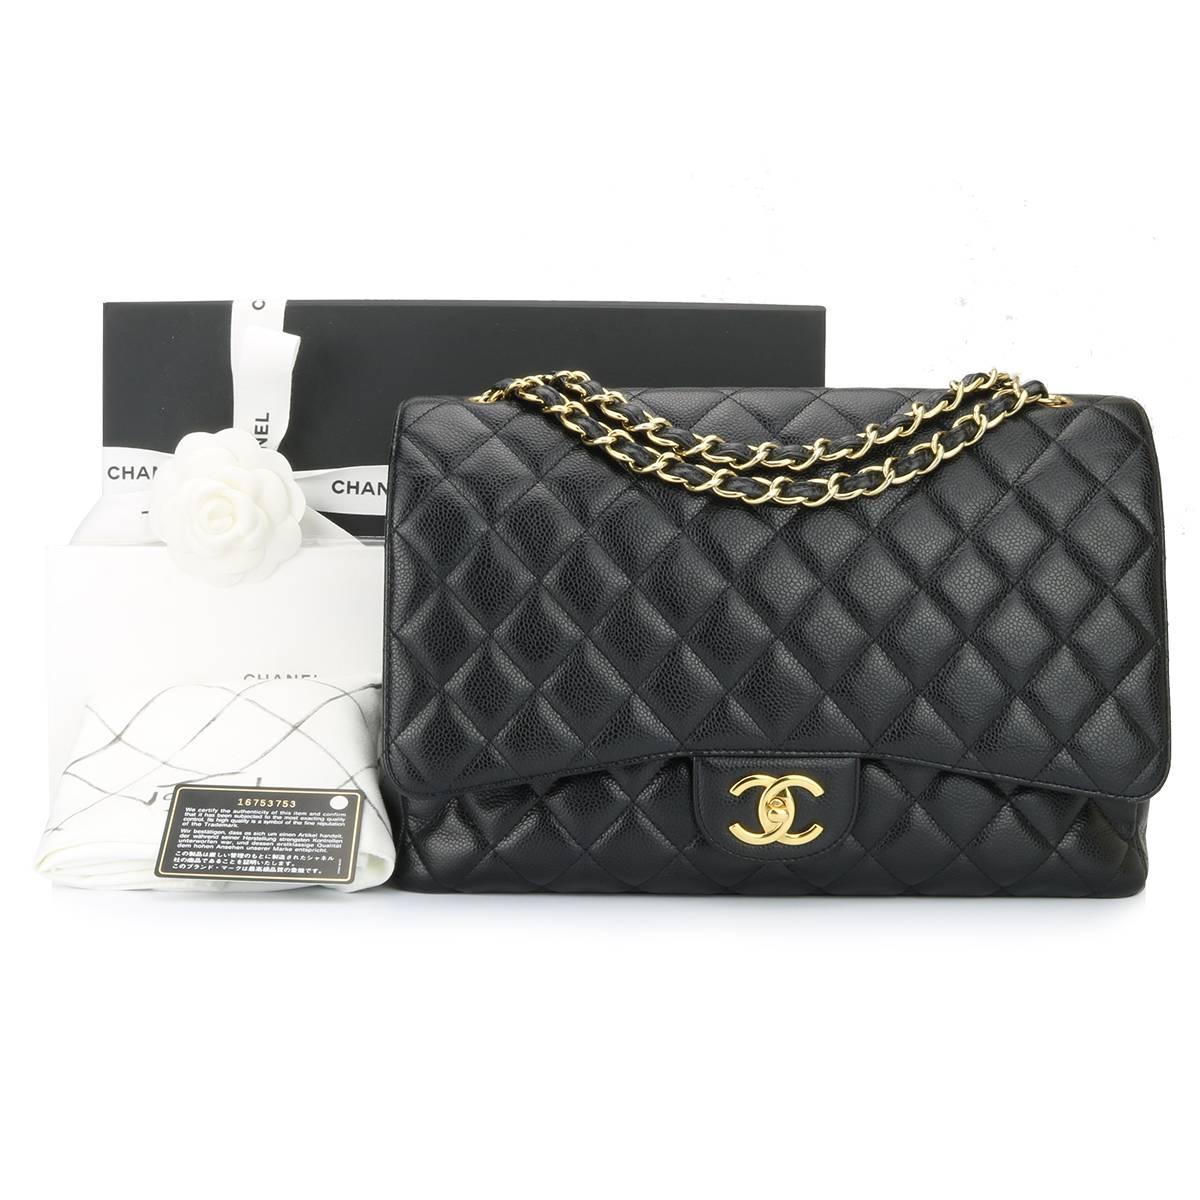 CHANEL Black Caviar Maxi Double Flap with Gold Hardware 2012 6